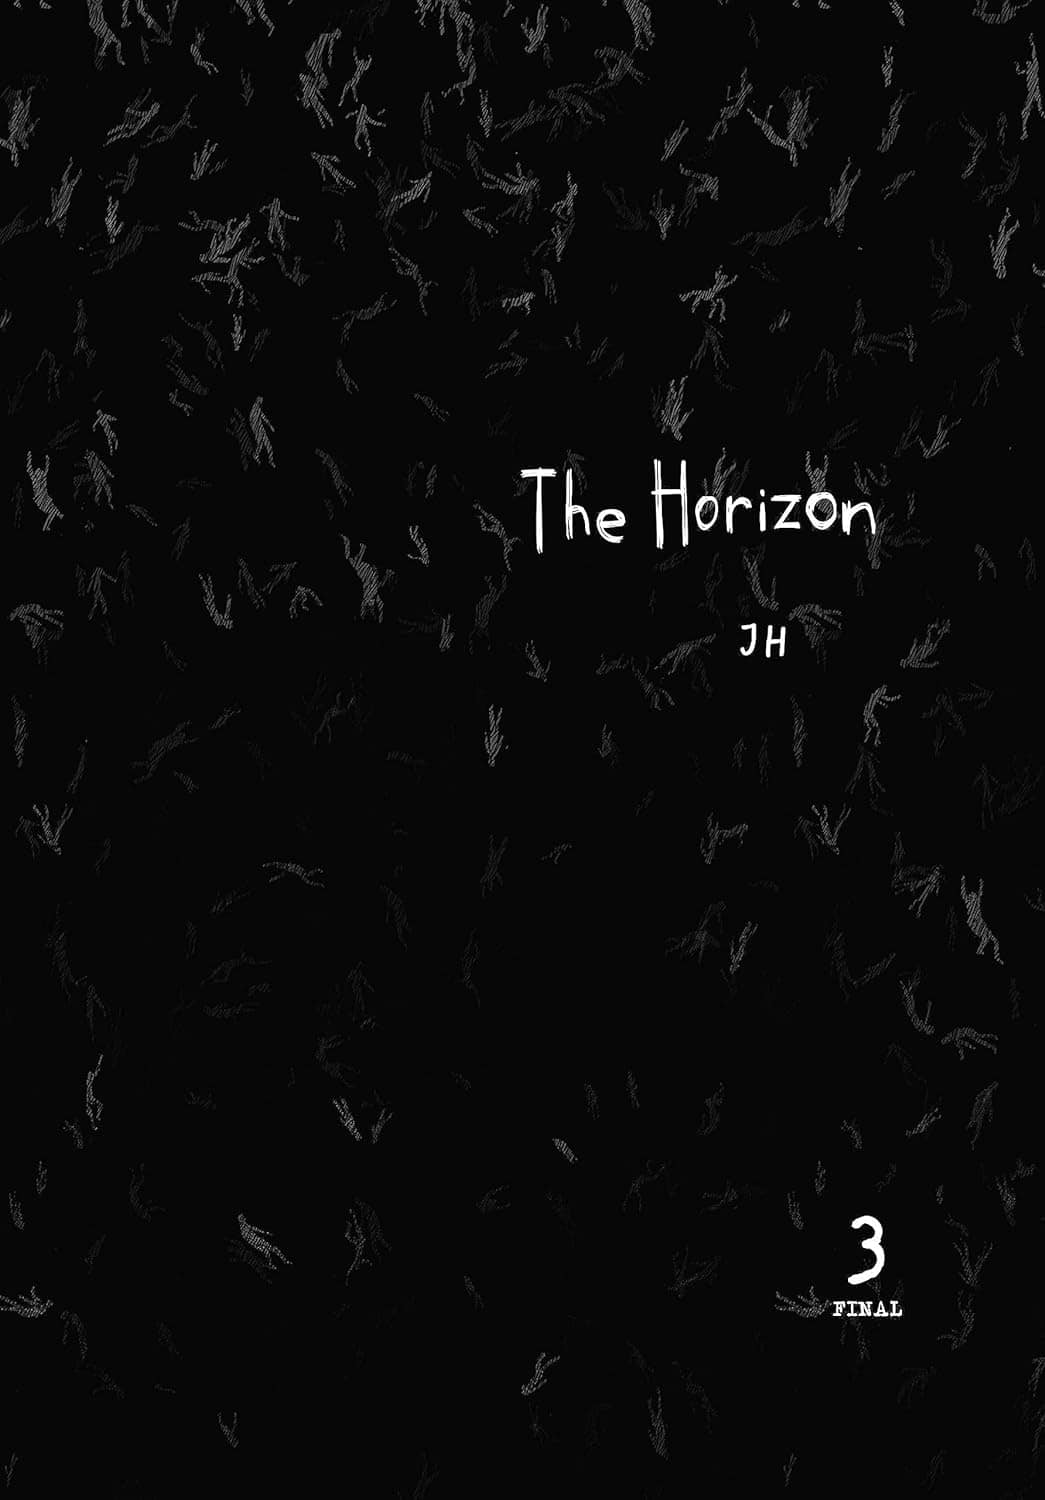 Cover for volume 3 of JH's The Horizon